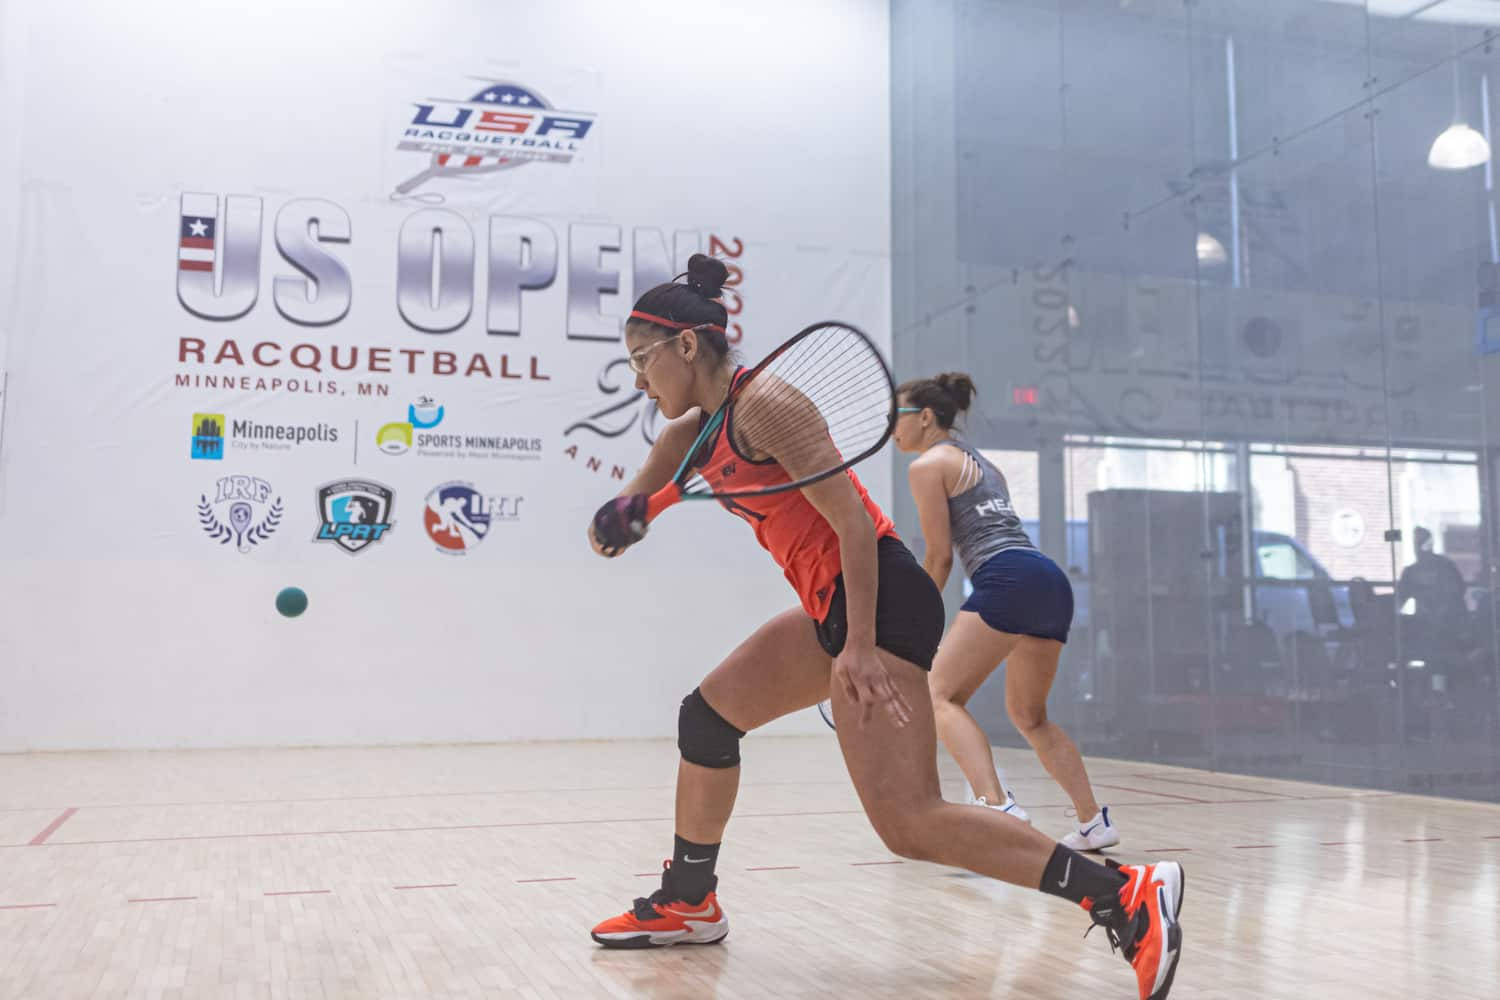 2022 Us Open Racquetball Competition Wallpaper